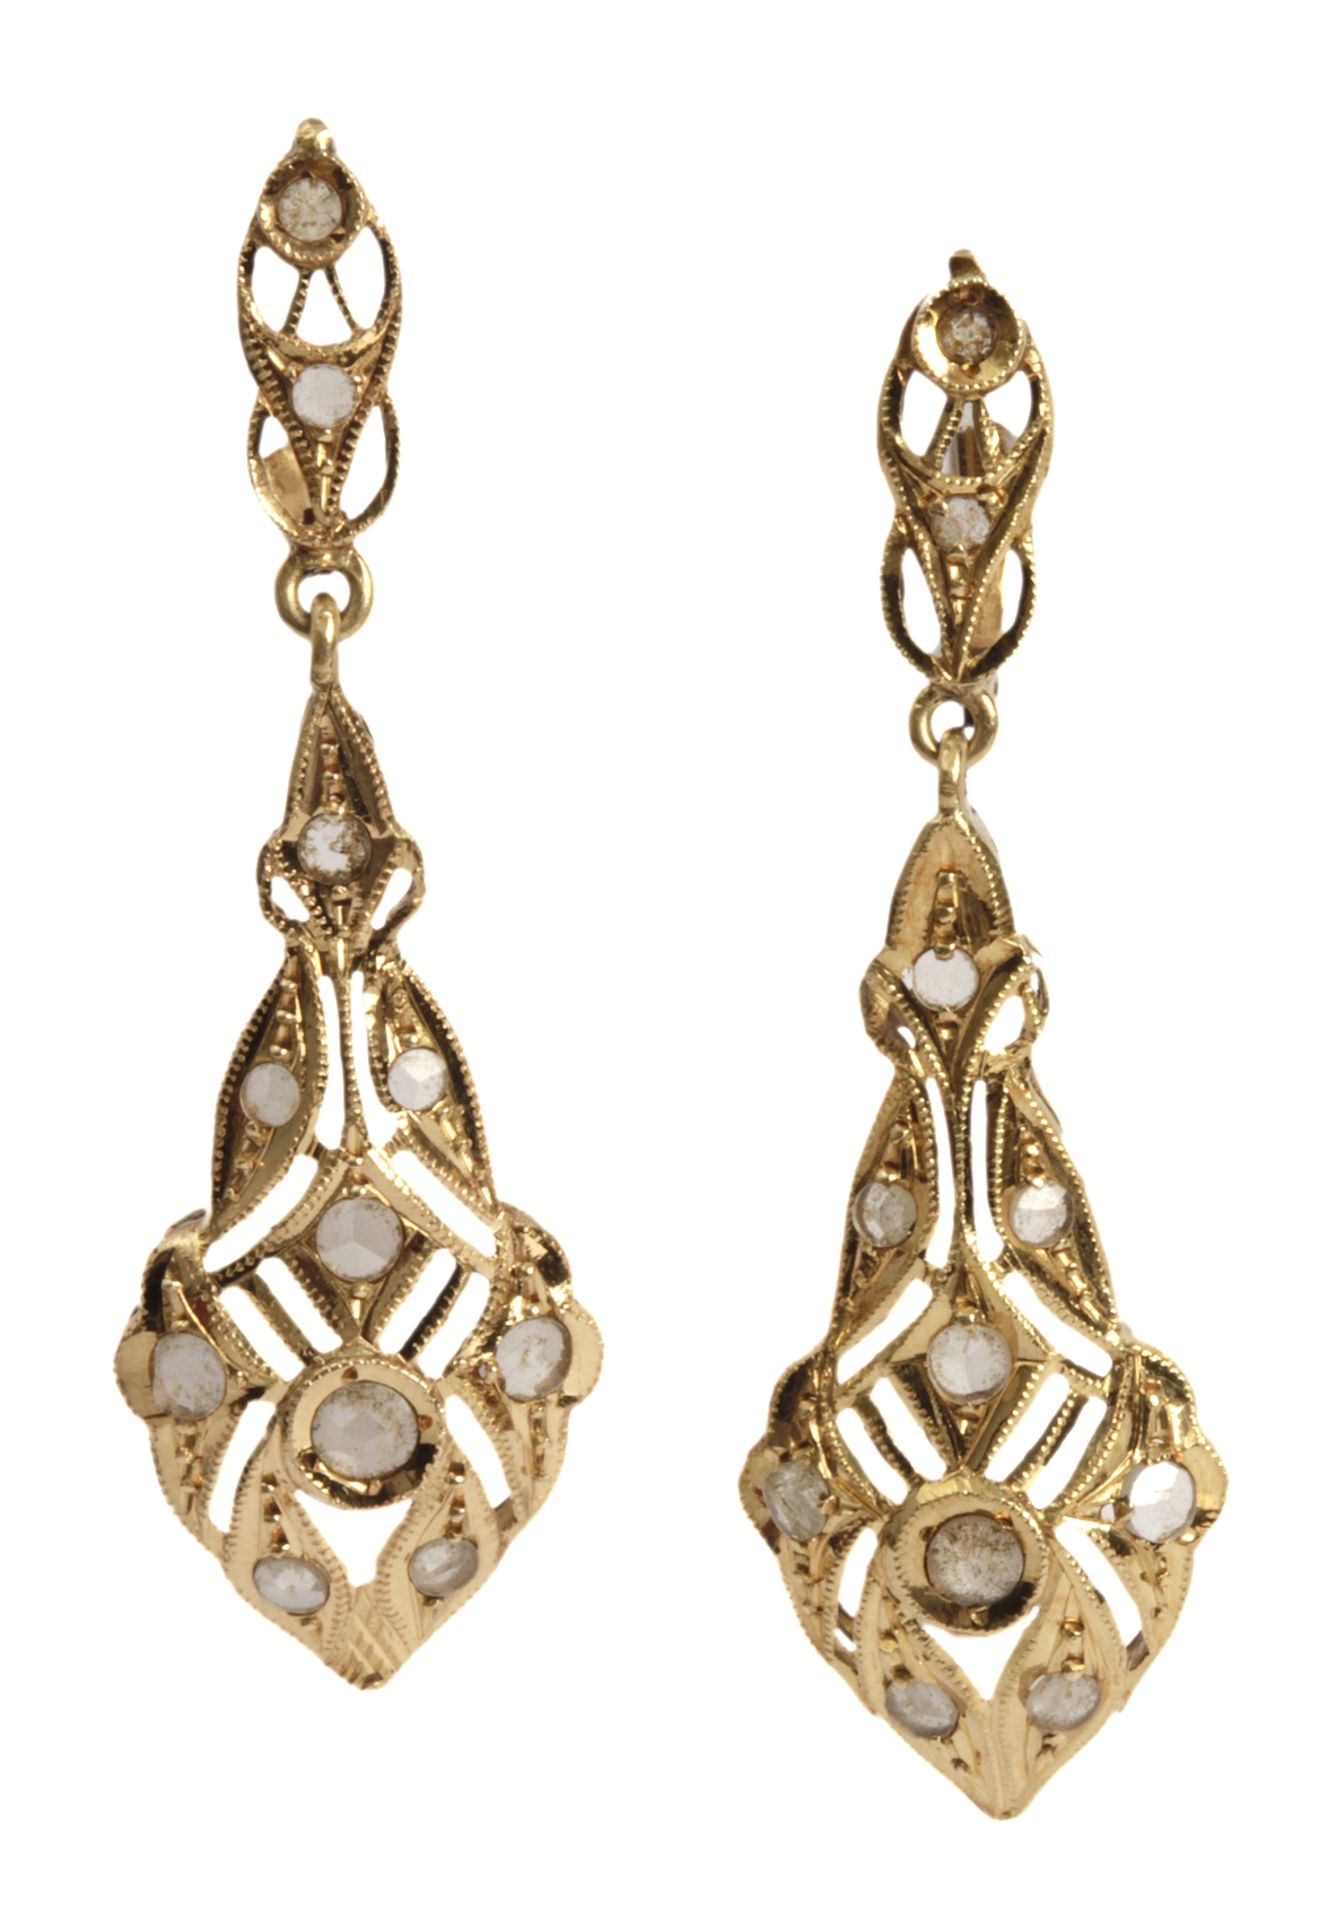 A pair of long earrings circa 1900. 18 ct. yellow gold and rose cut diamonds. With their original c